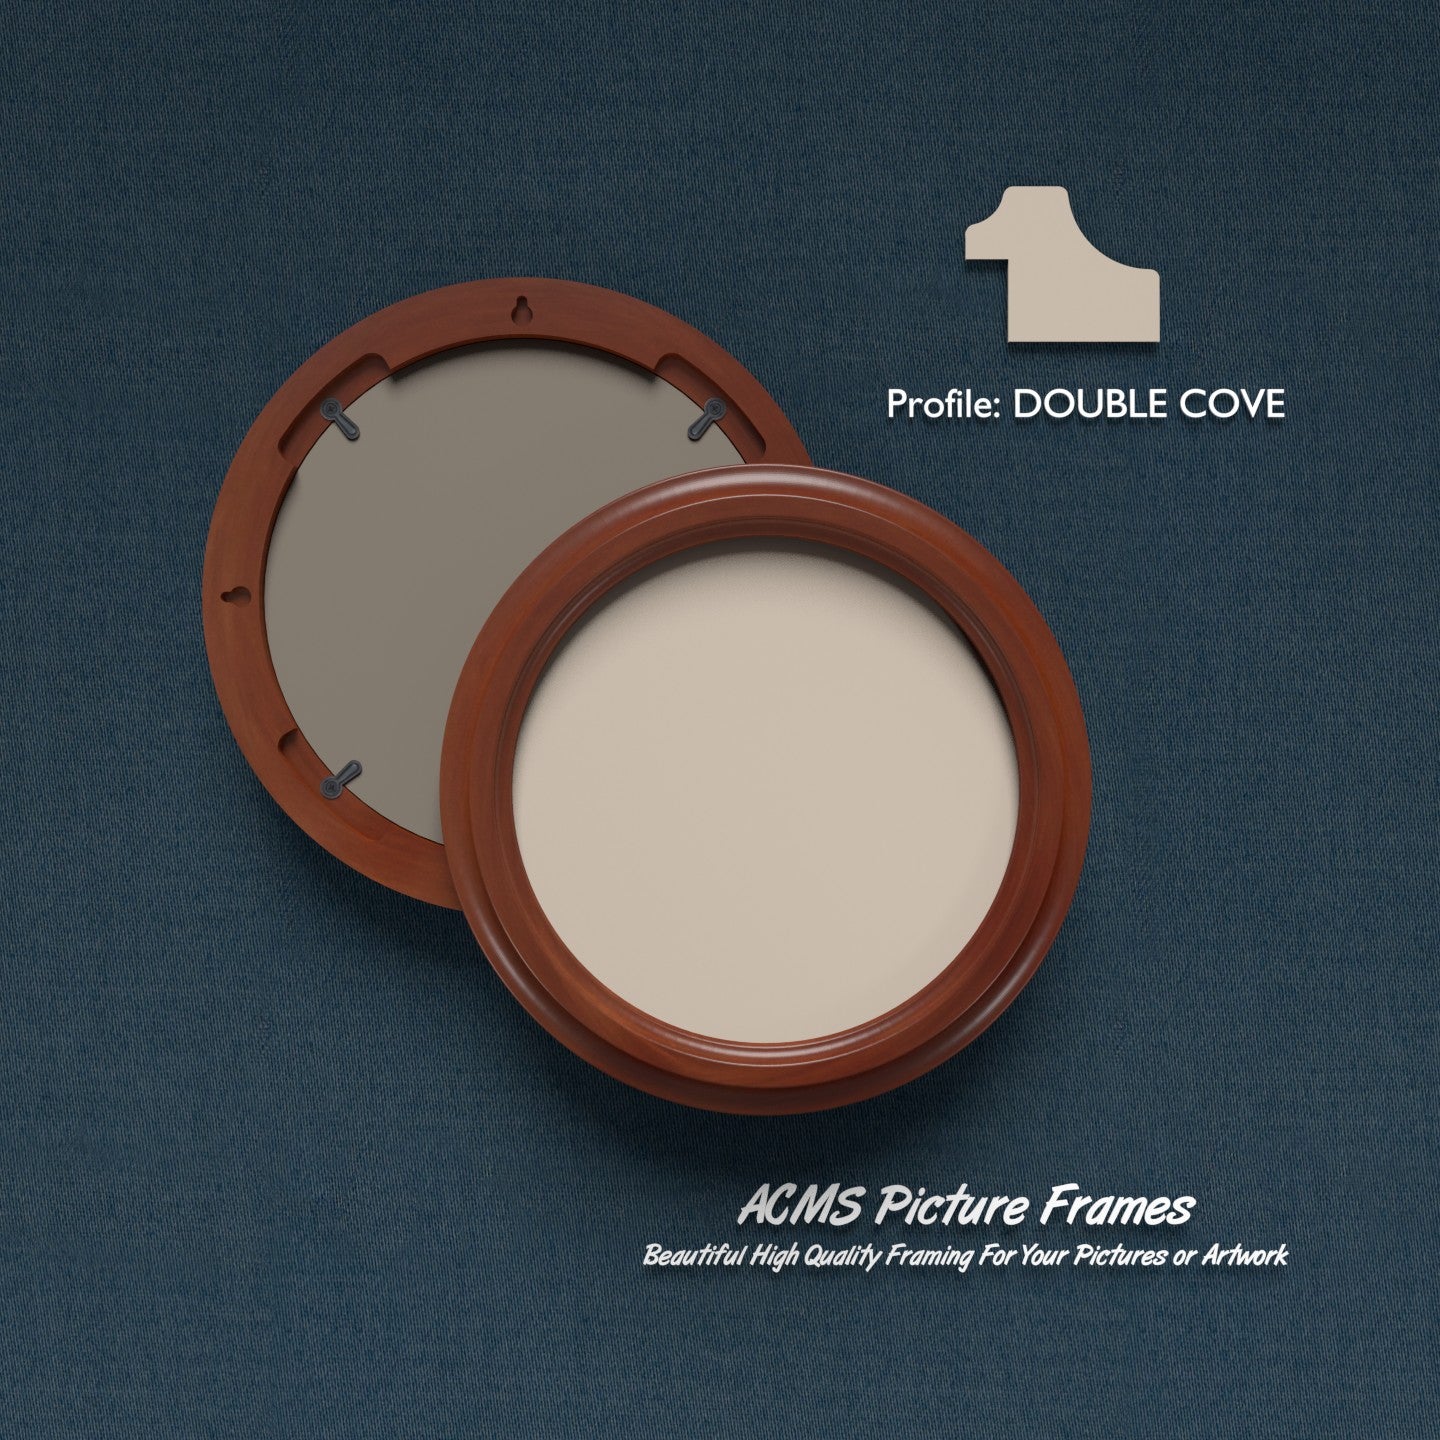 Round Picture Frame - Double Cove Profile - 1.25" Frame Width